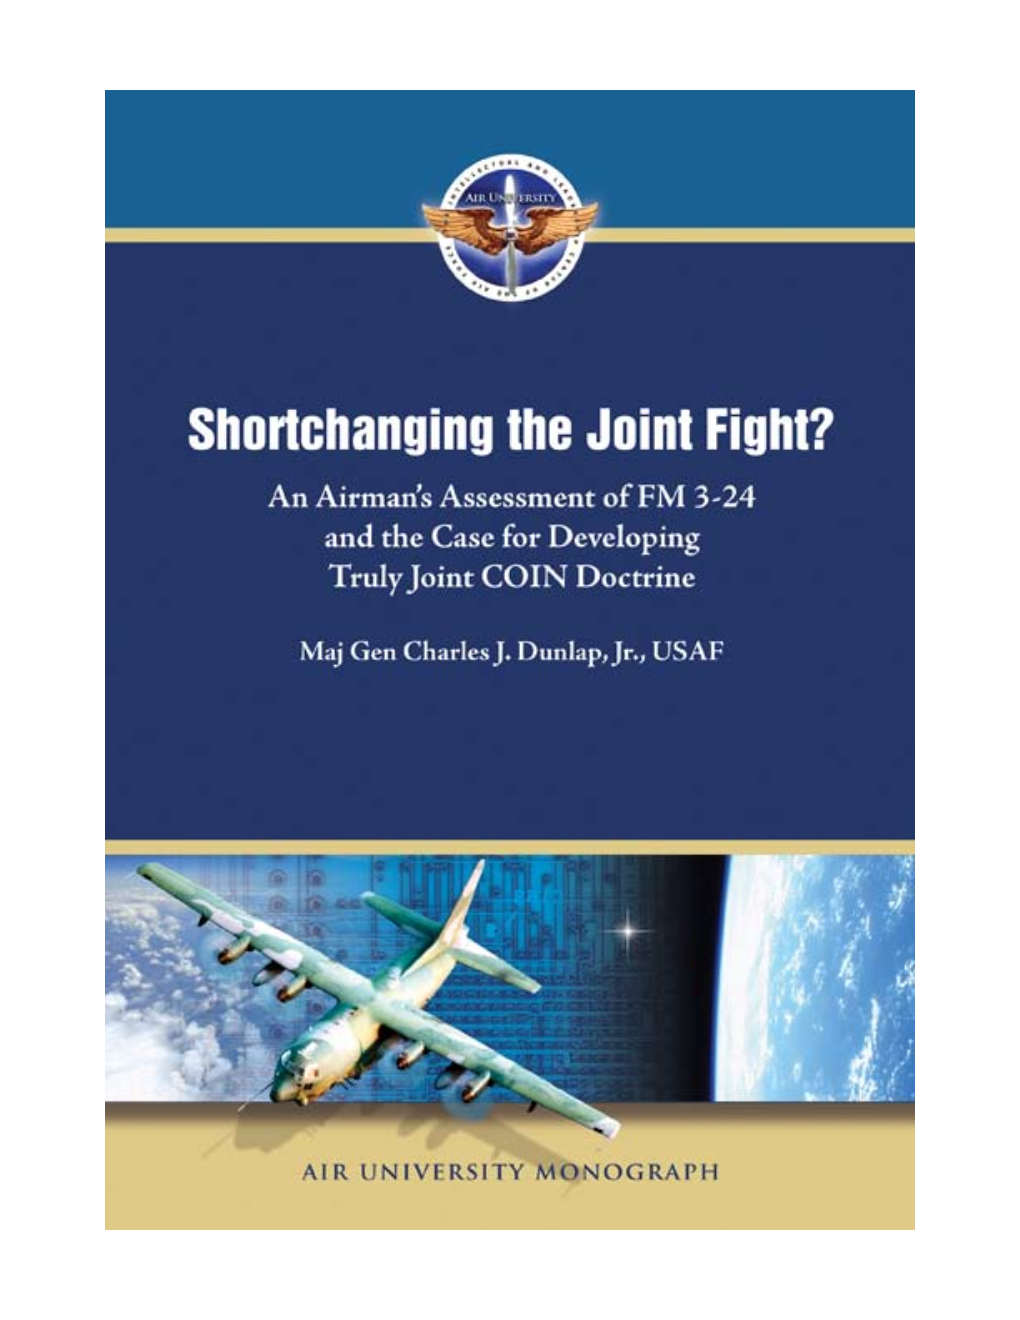 Shortchanging the Joint Fight? an Airman’S Assessment of FM 3-24 and the Case for Developing Truly Joint COIN Doctrine